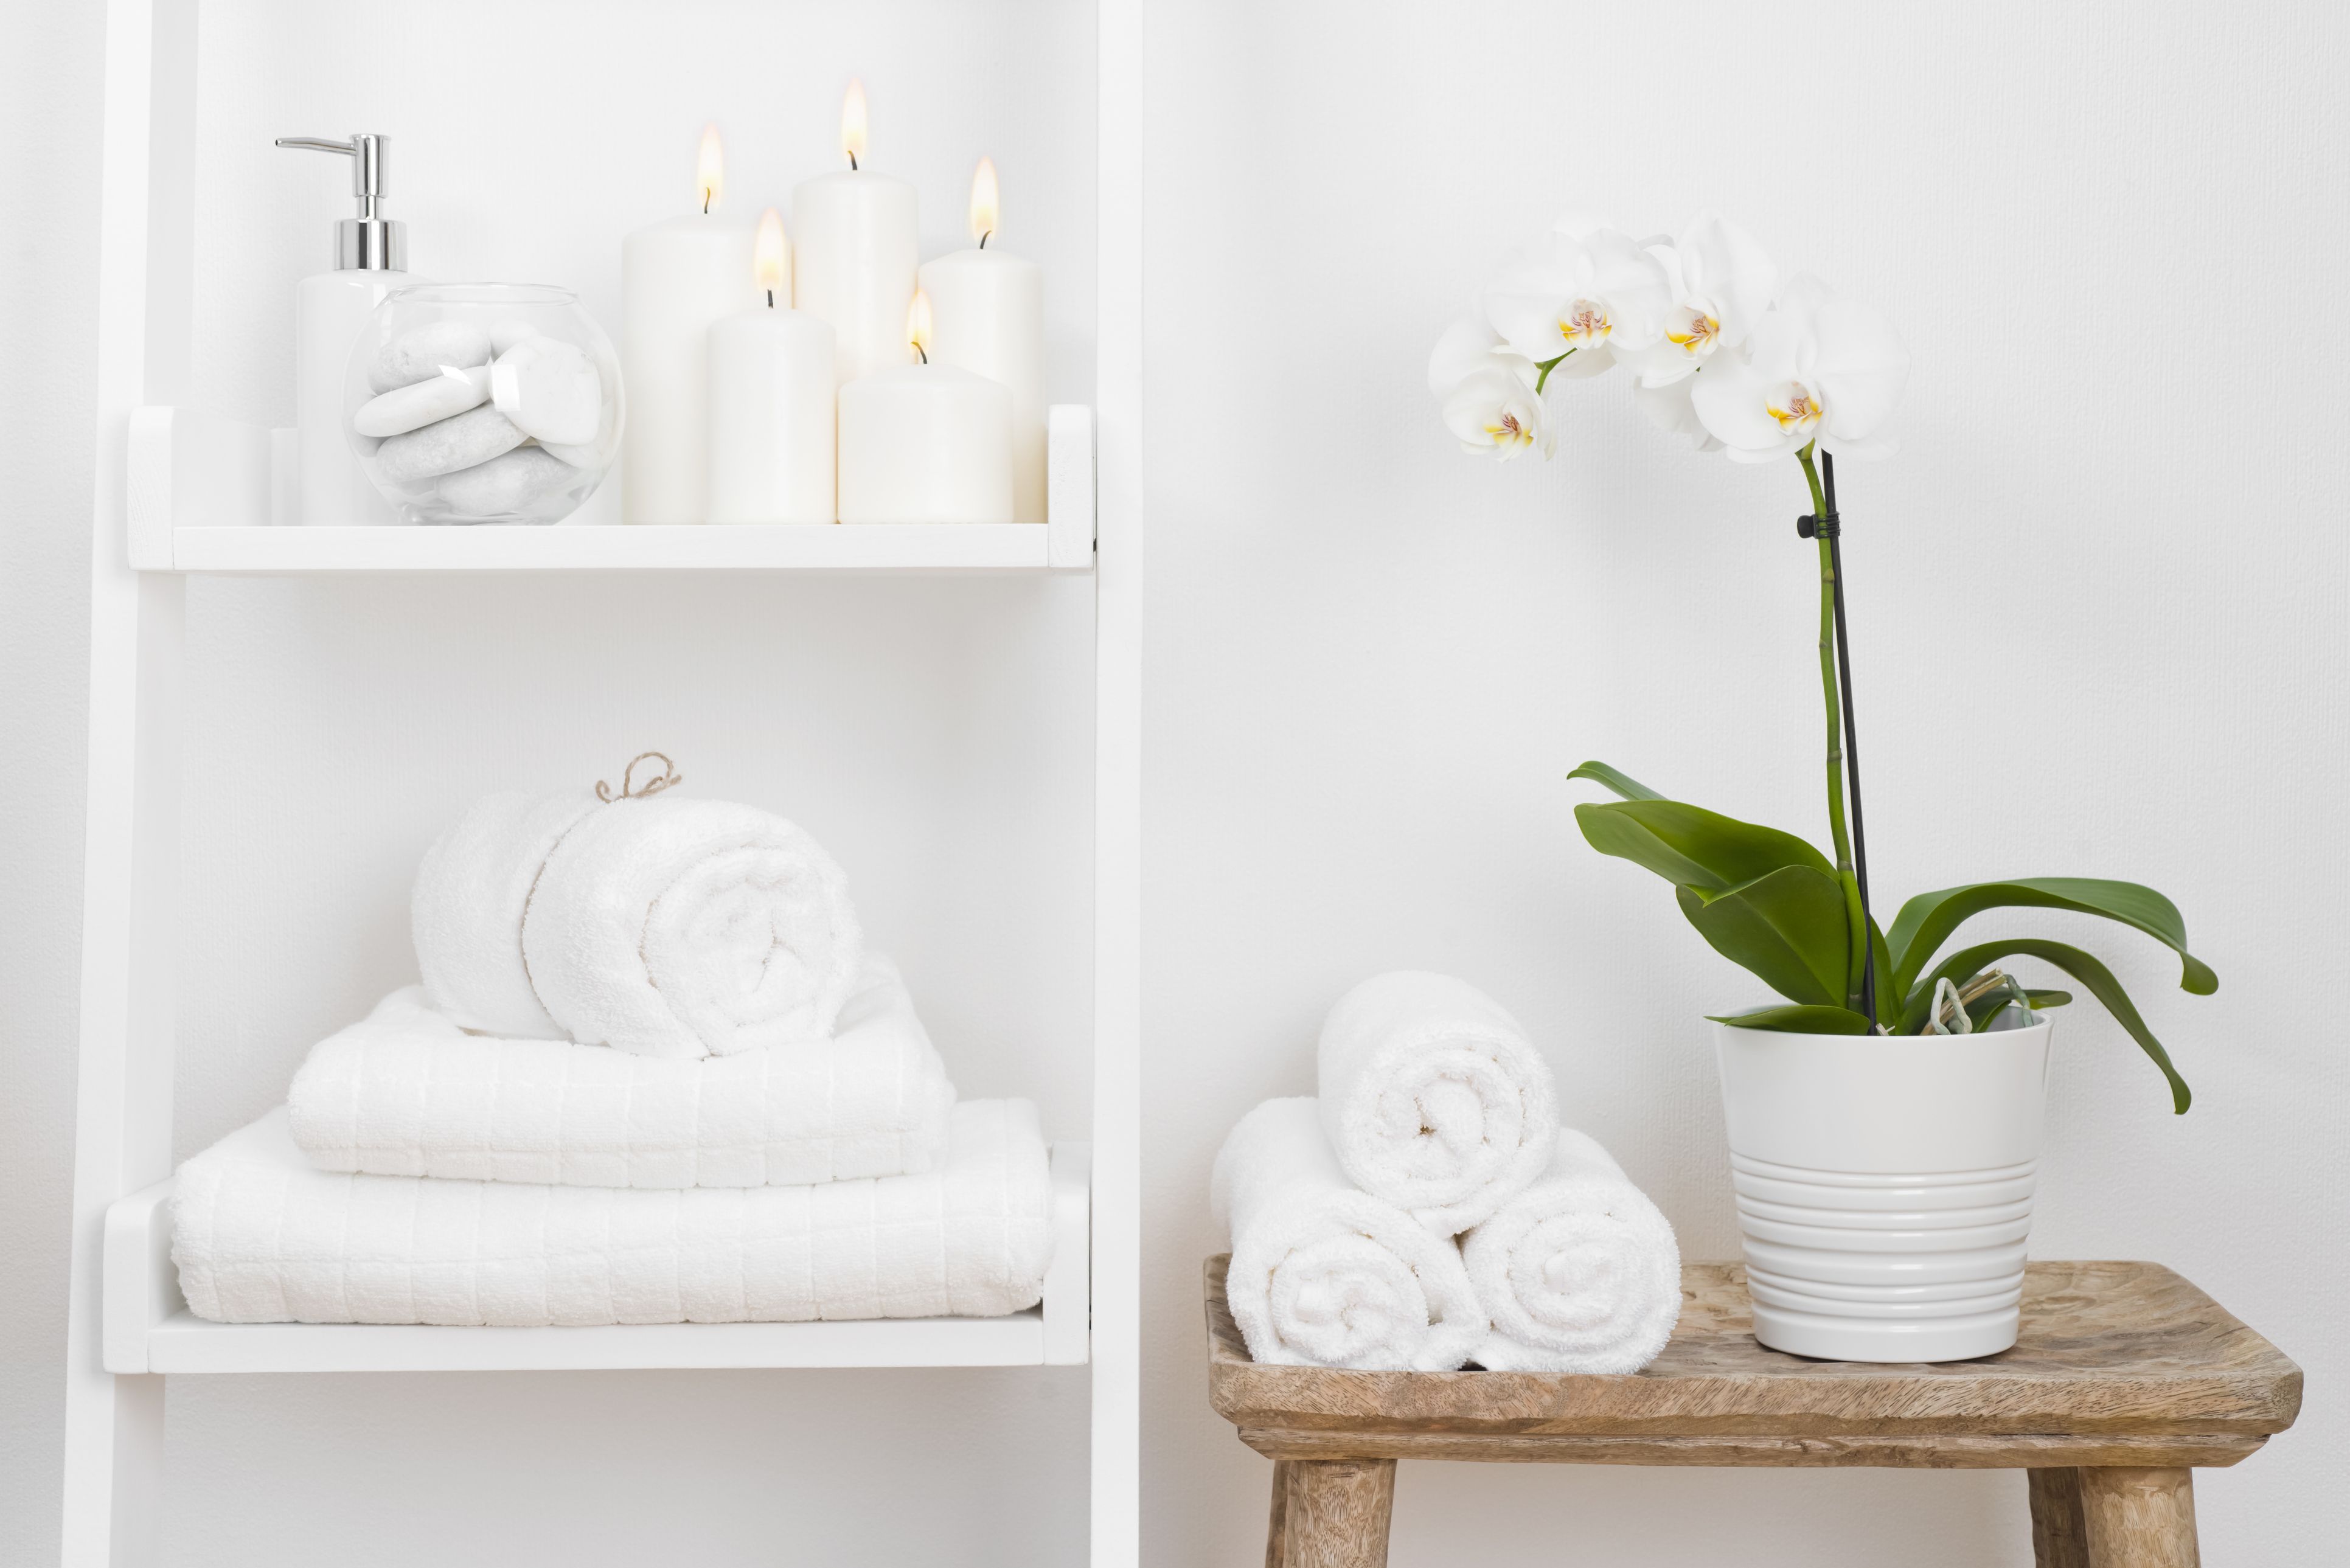 Bath Sheets Are Very Different Than Bath Towels, And We'll Explain Why